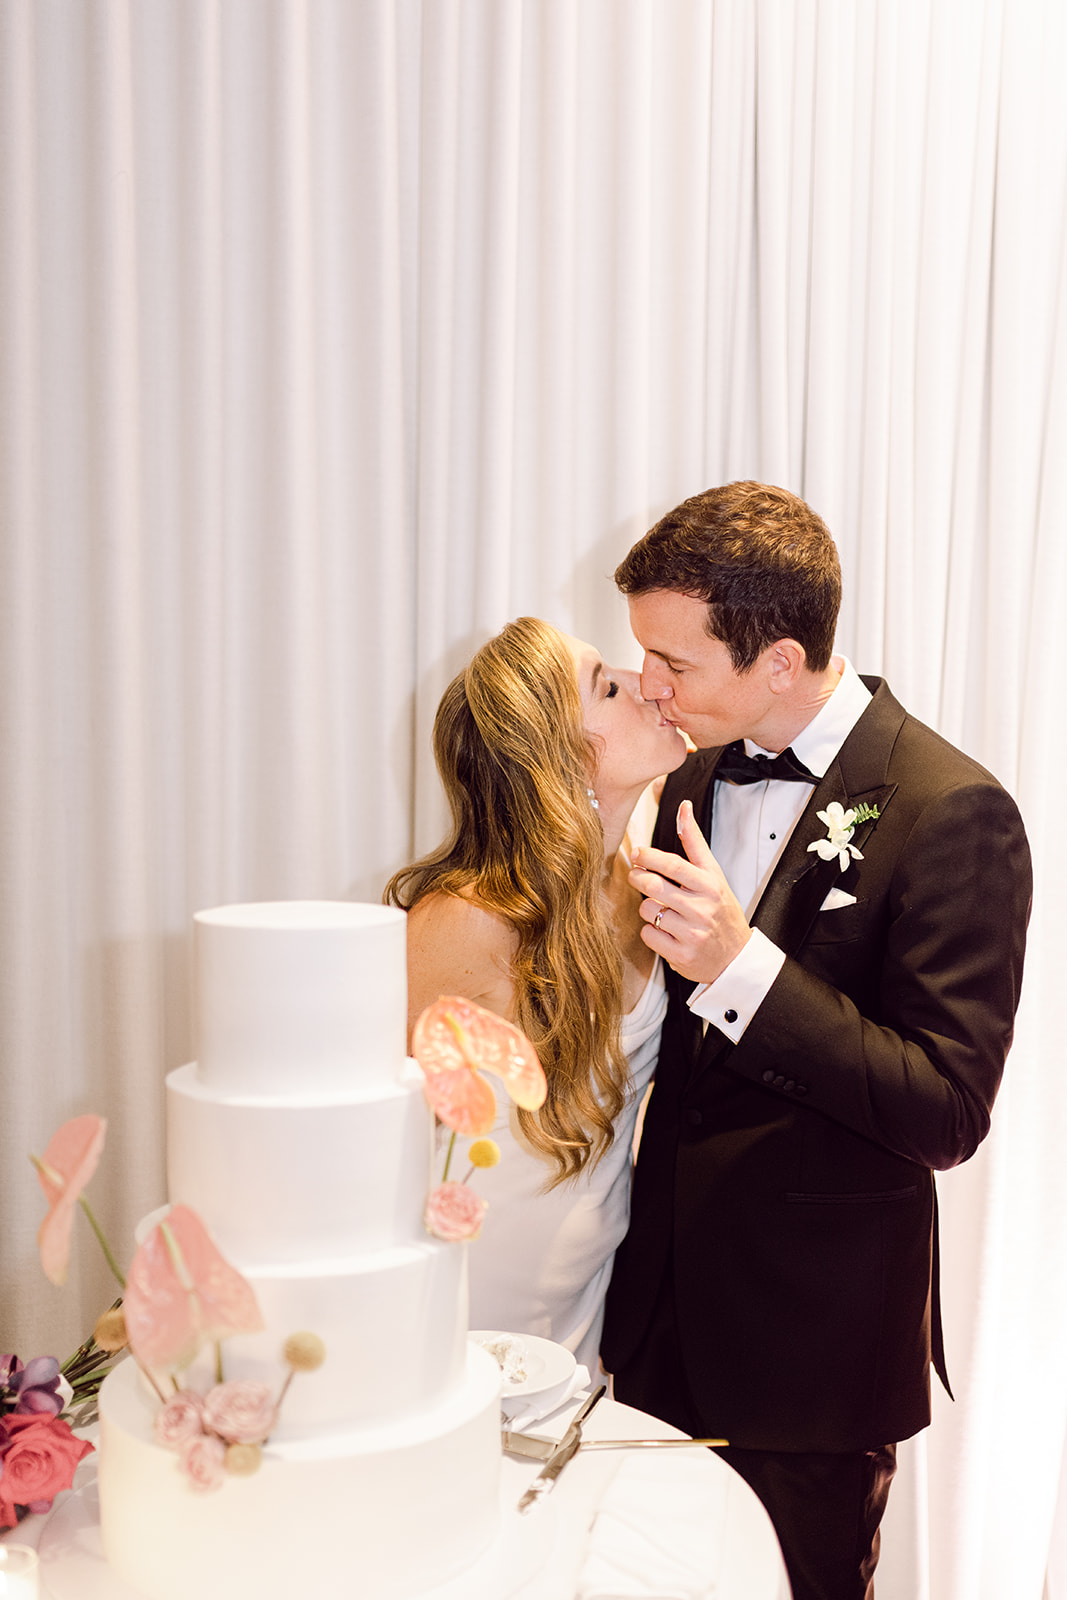 Bride and groom kiss after cutting cake in reception hall of Mayfair House Hotel & Garden, Miami on wedding day.